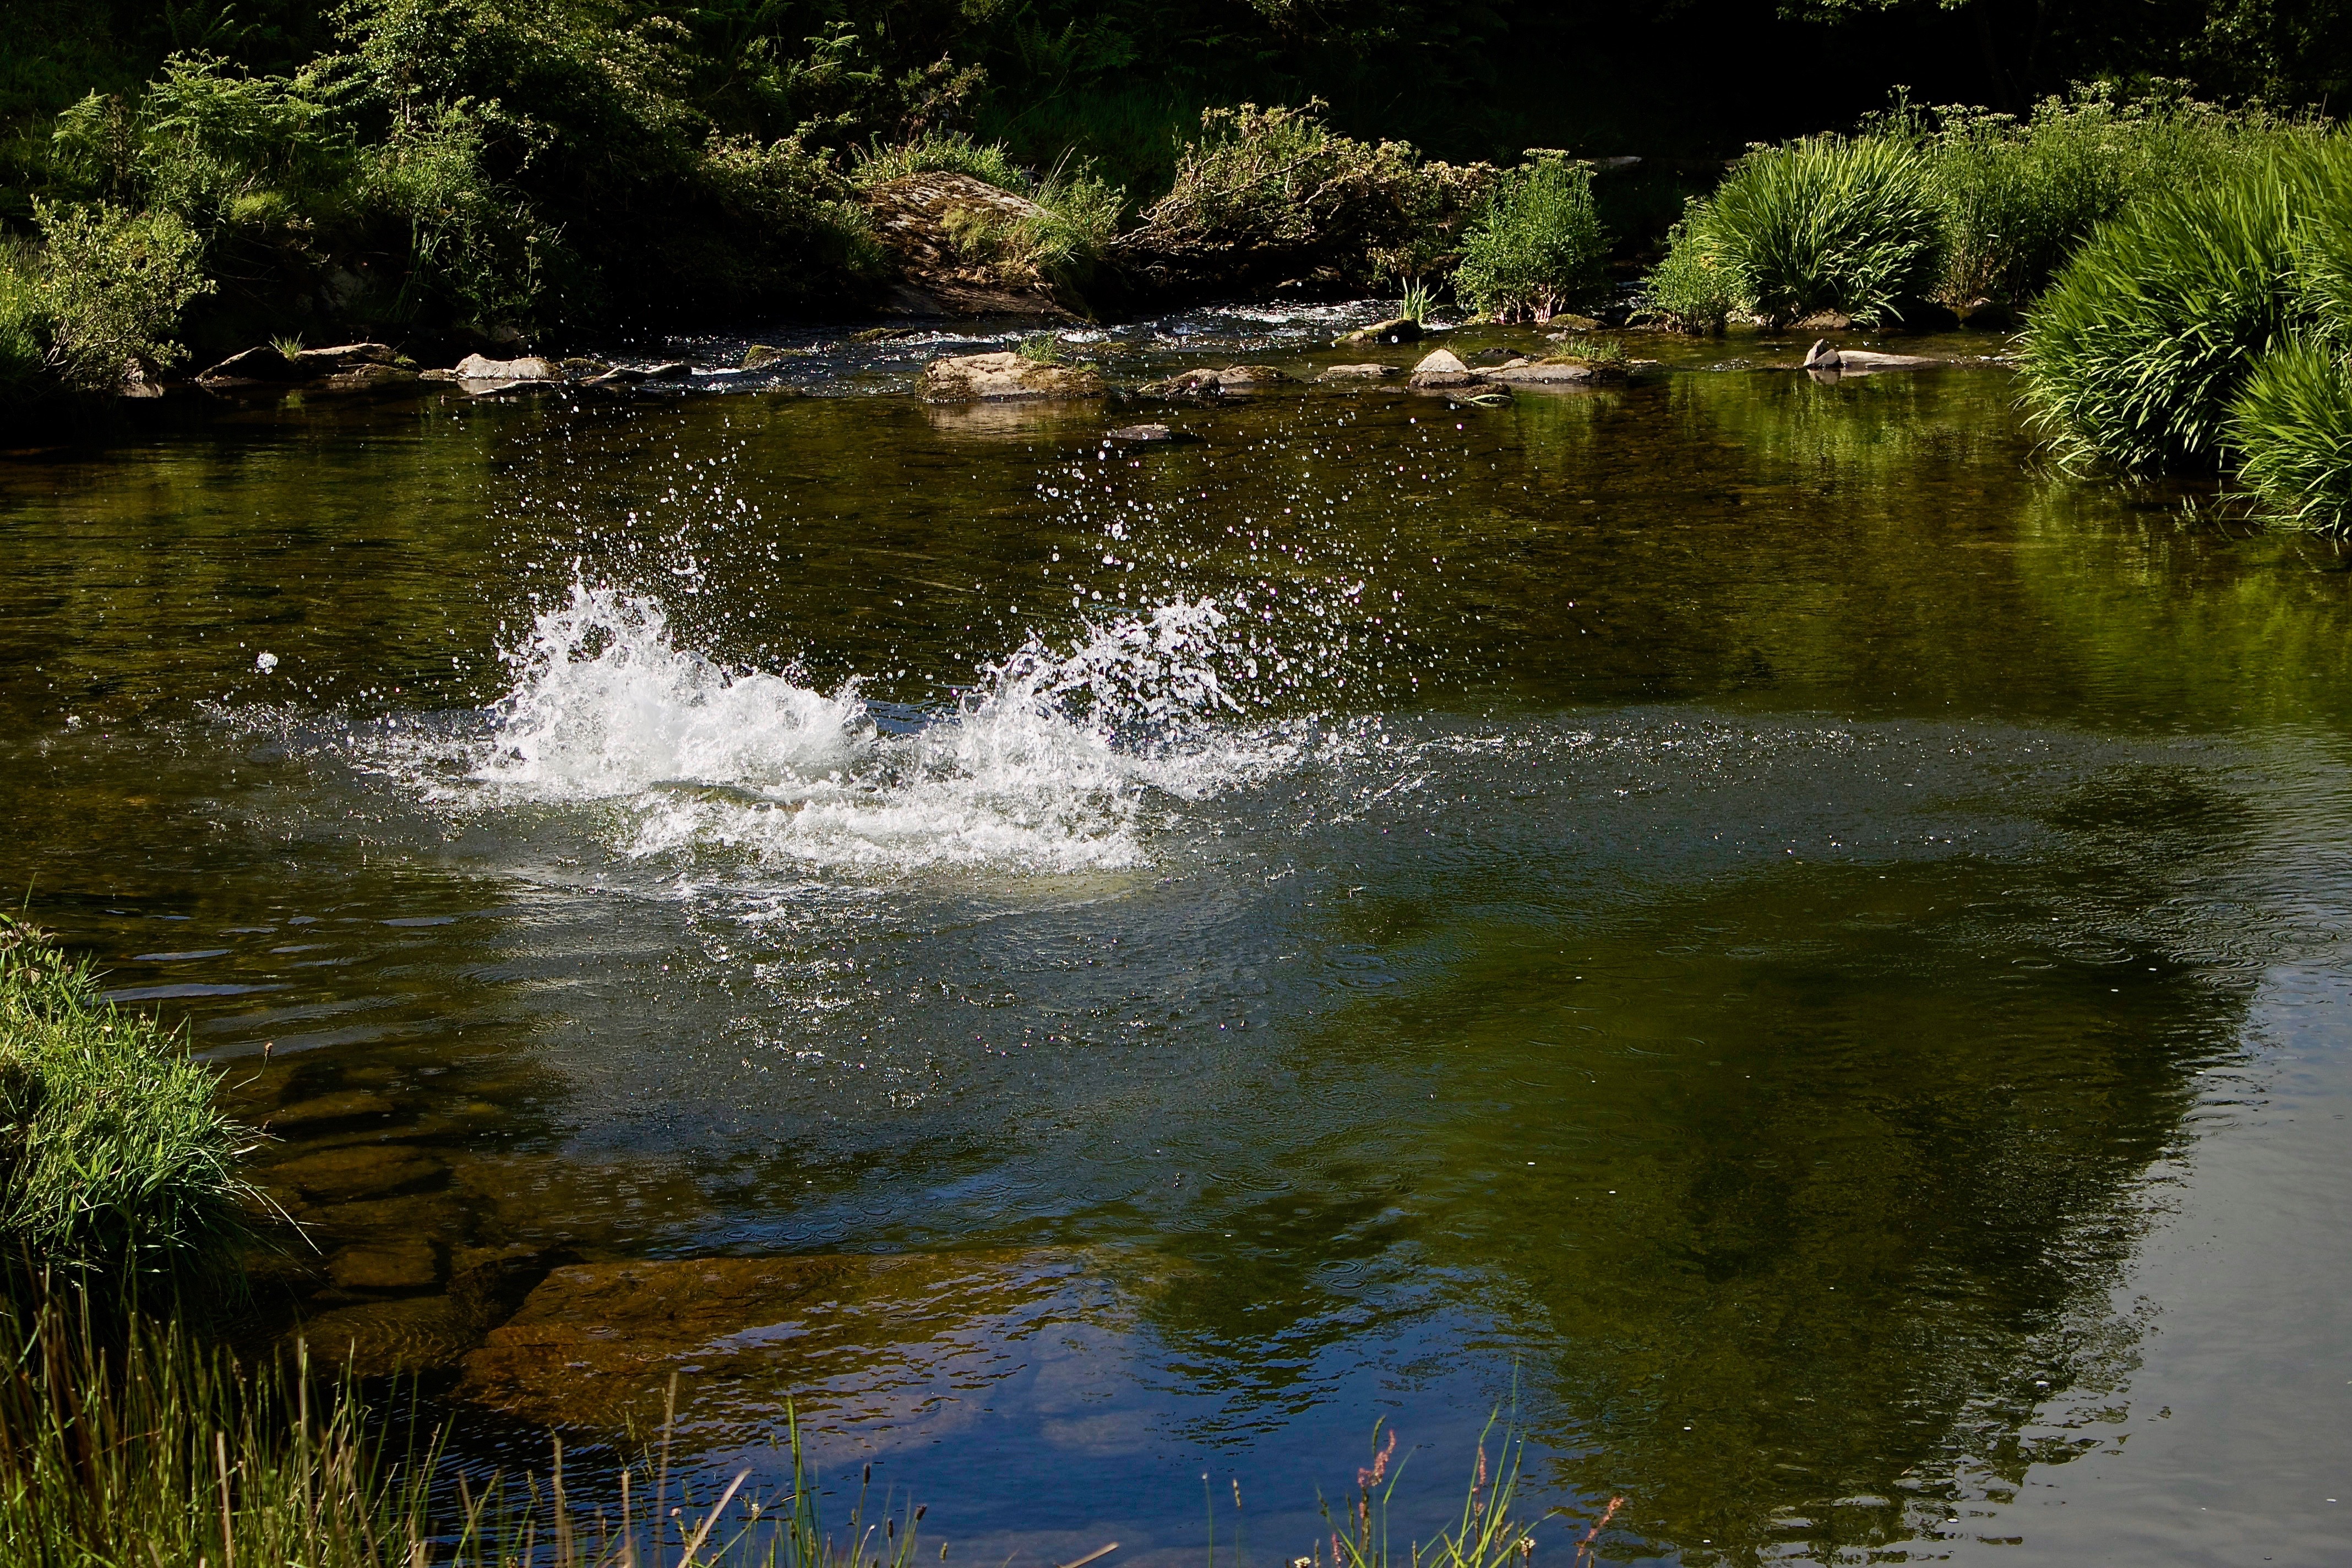 A wild-swimmer makes a large splash diving  into a remote riverside pool on the River Barle on Exmoor.